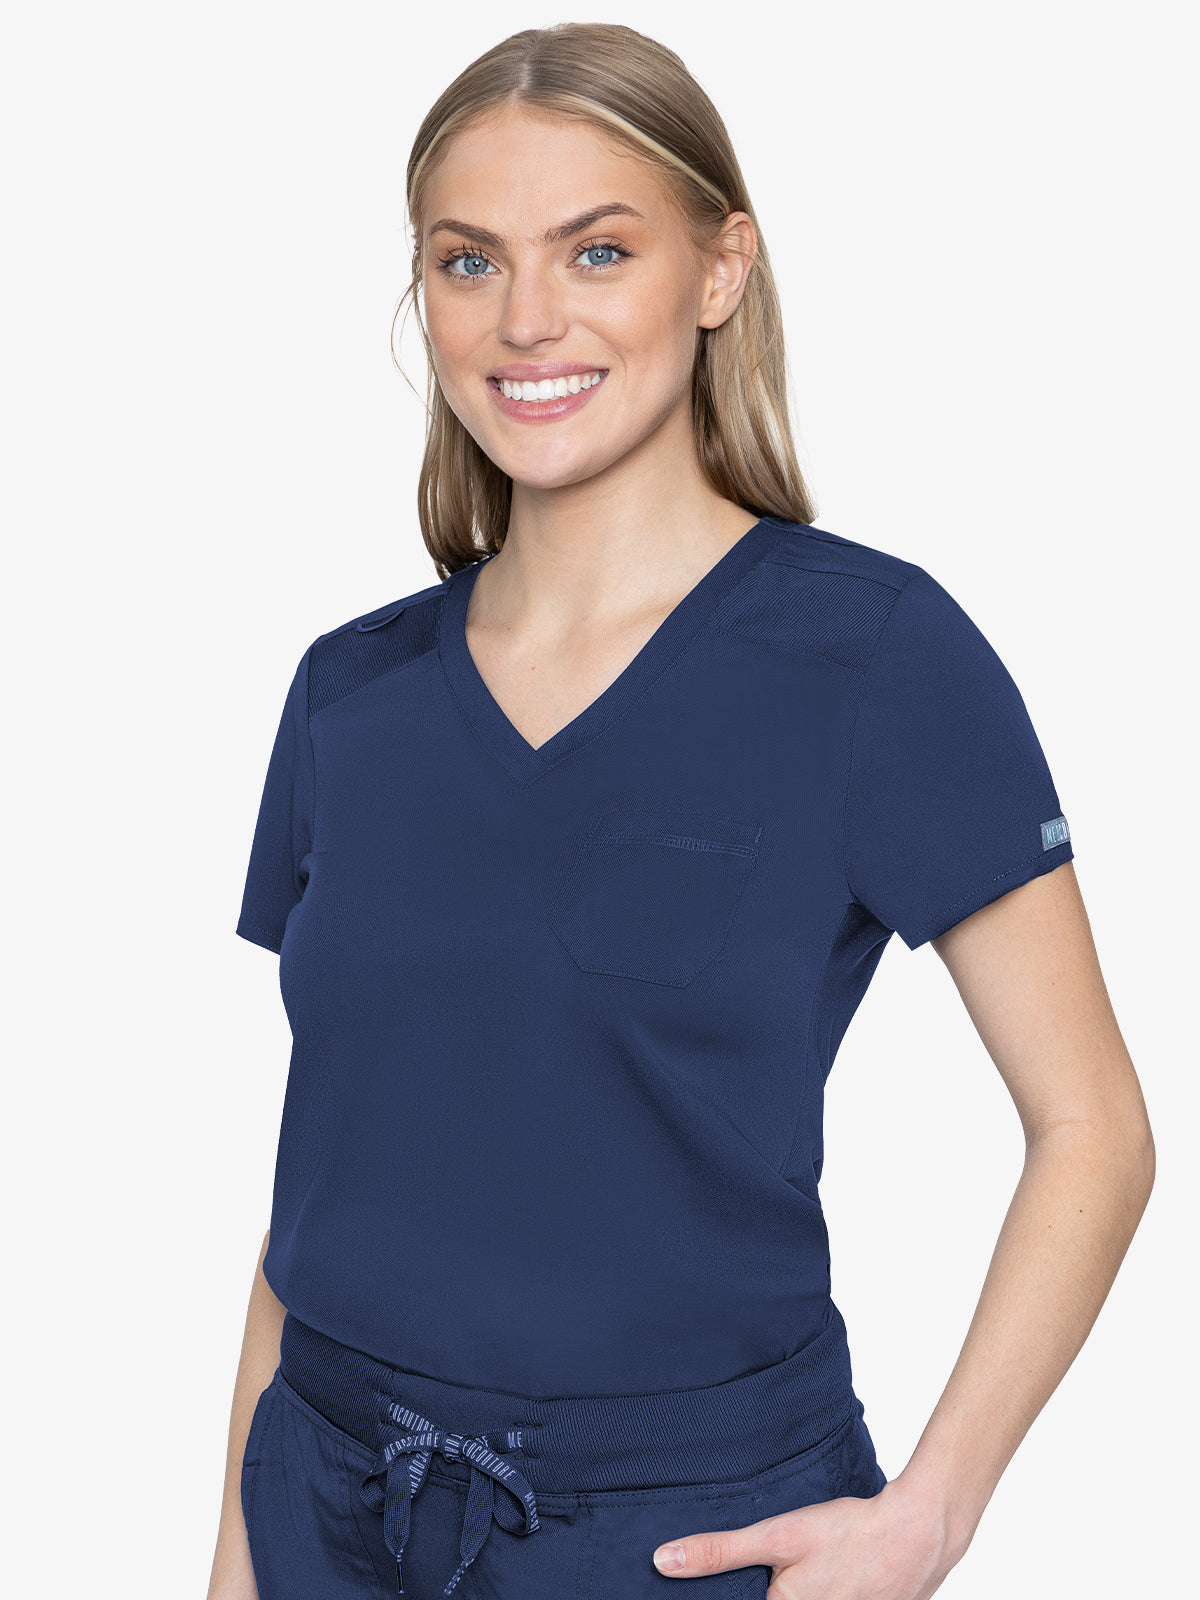 Med Couture Insight 1-Pocket Tuck-In Scrub Top, Scrubs & Beyond